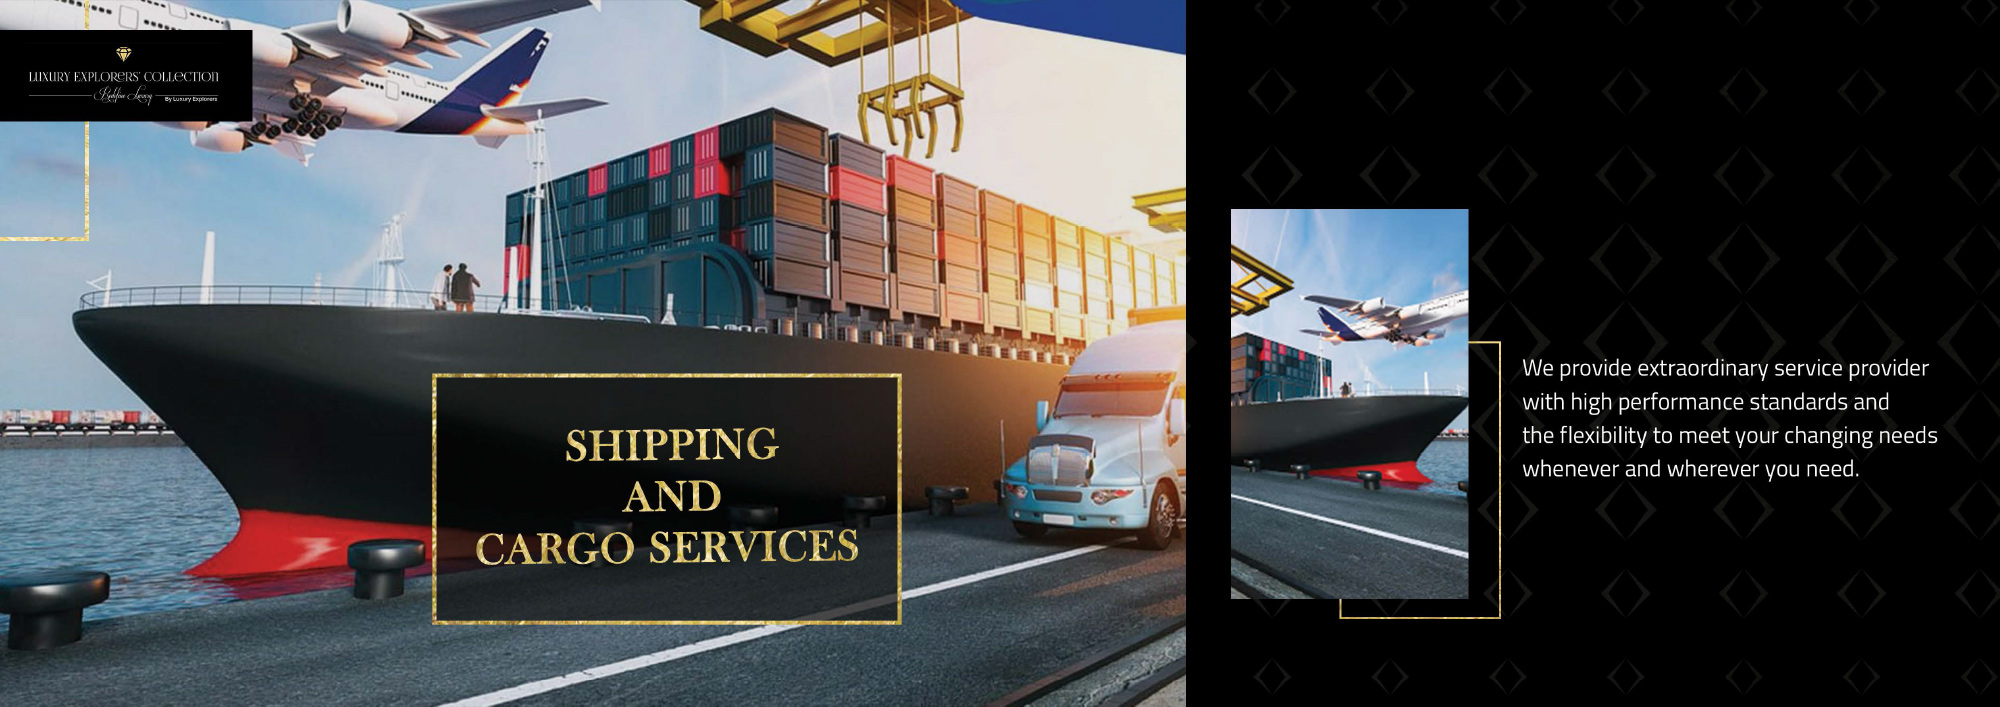 Shipping-and-Cargo-Services